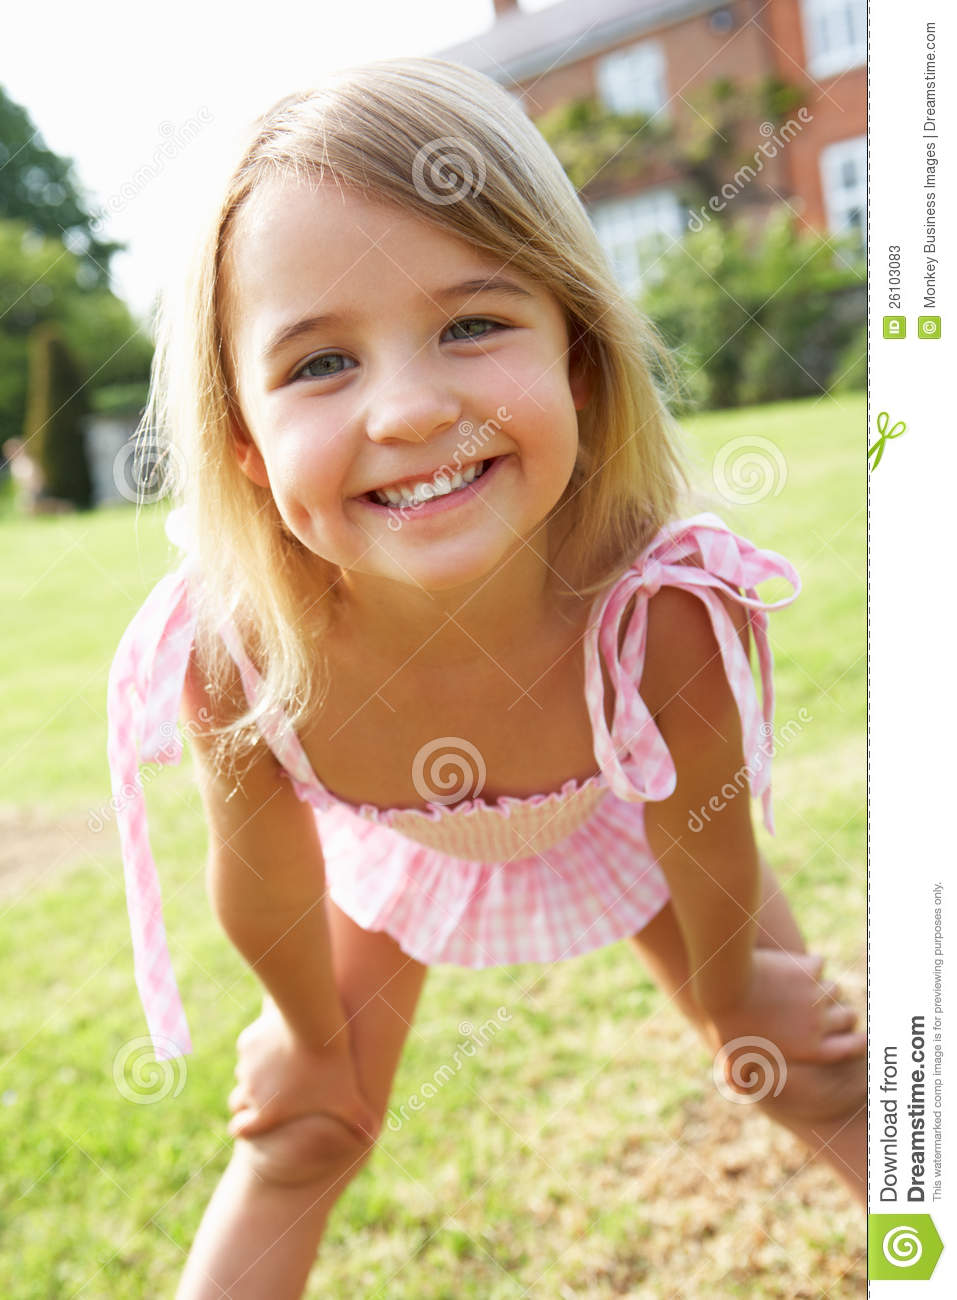 Portrait Of Young Girl Standing In Garden Wearing Swimming Costume